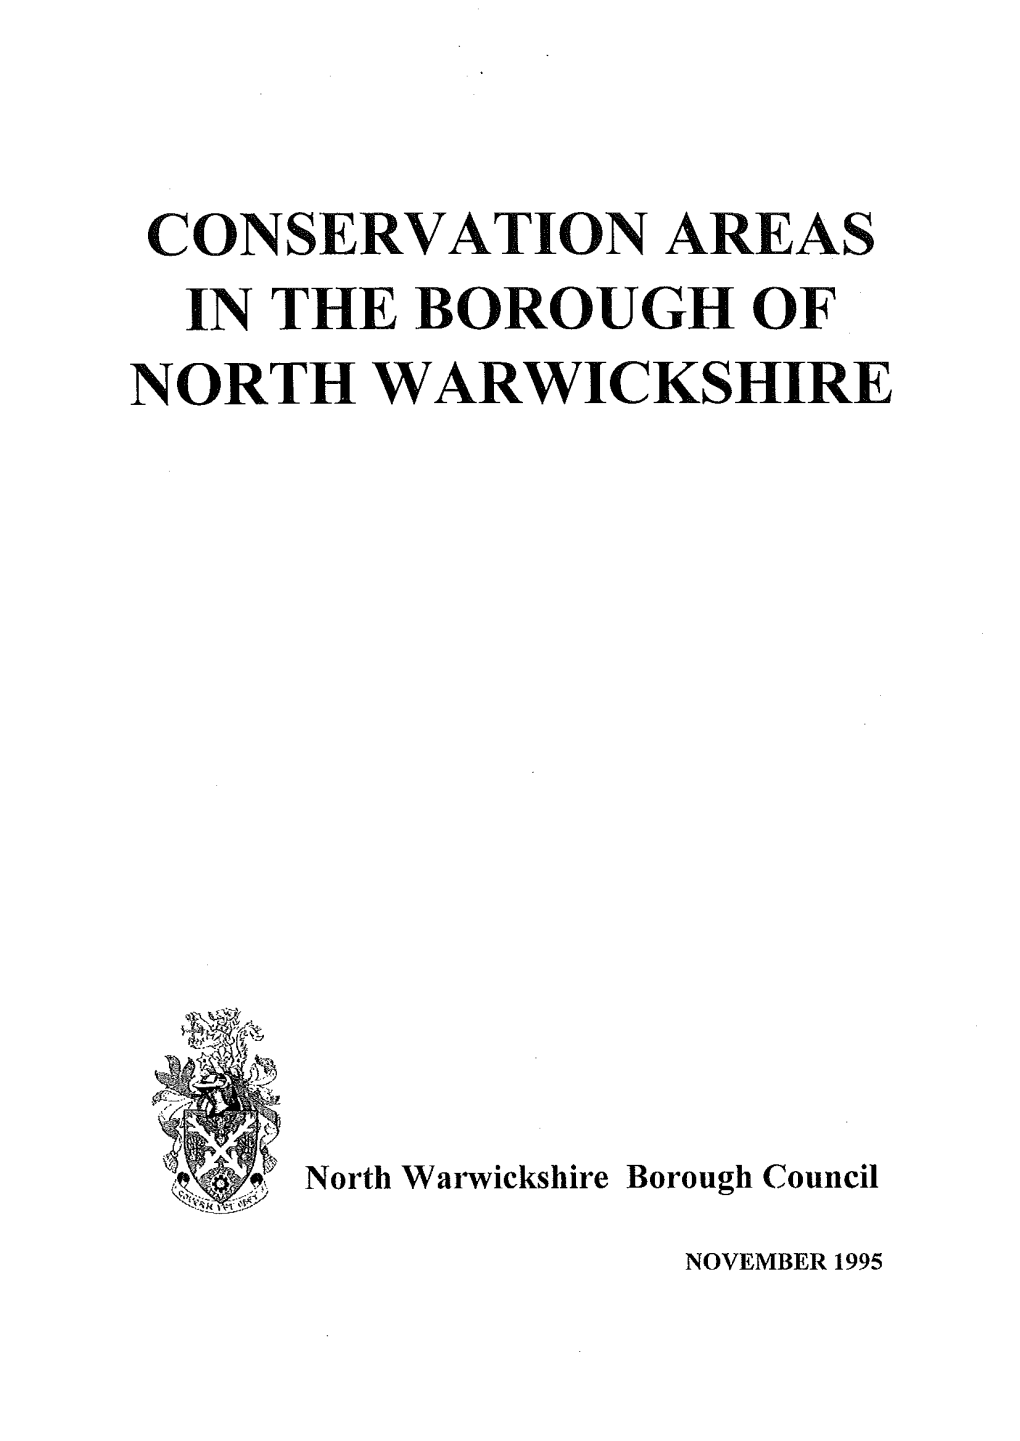 Conservation Areas in the Borough of North Warwickshire